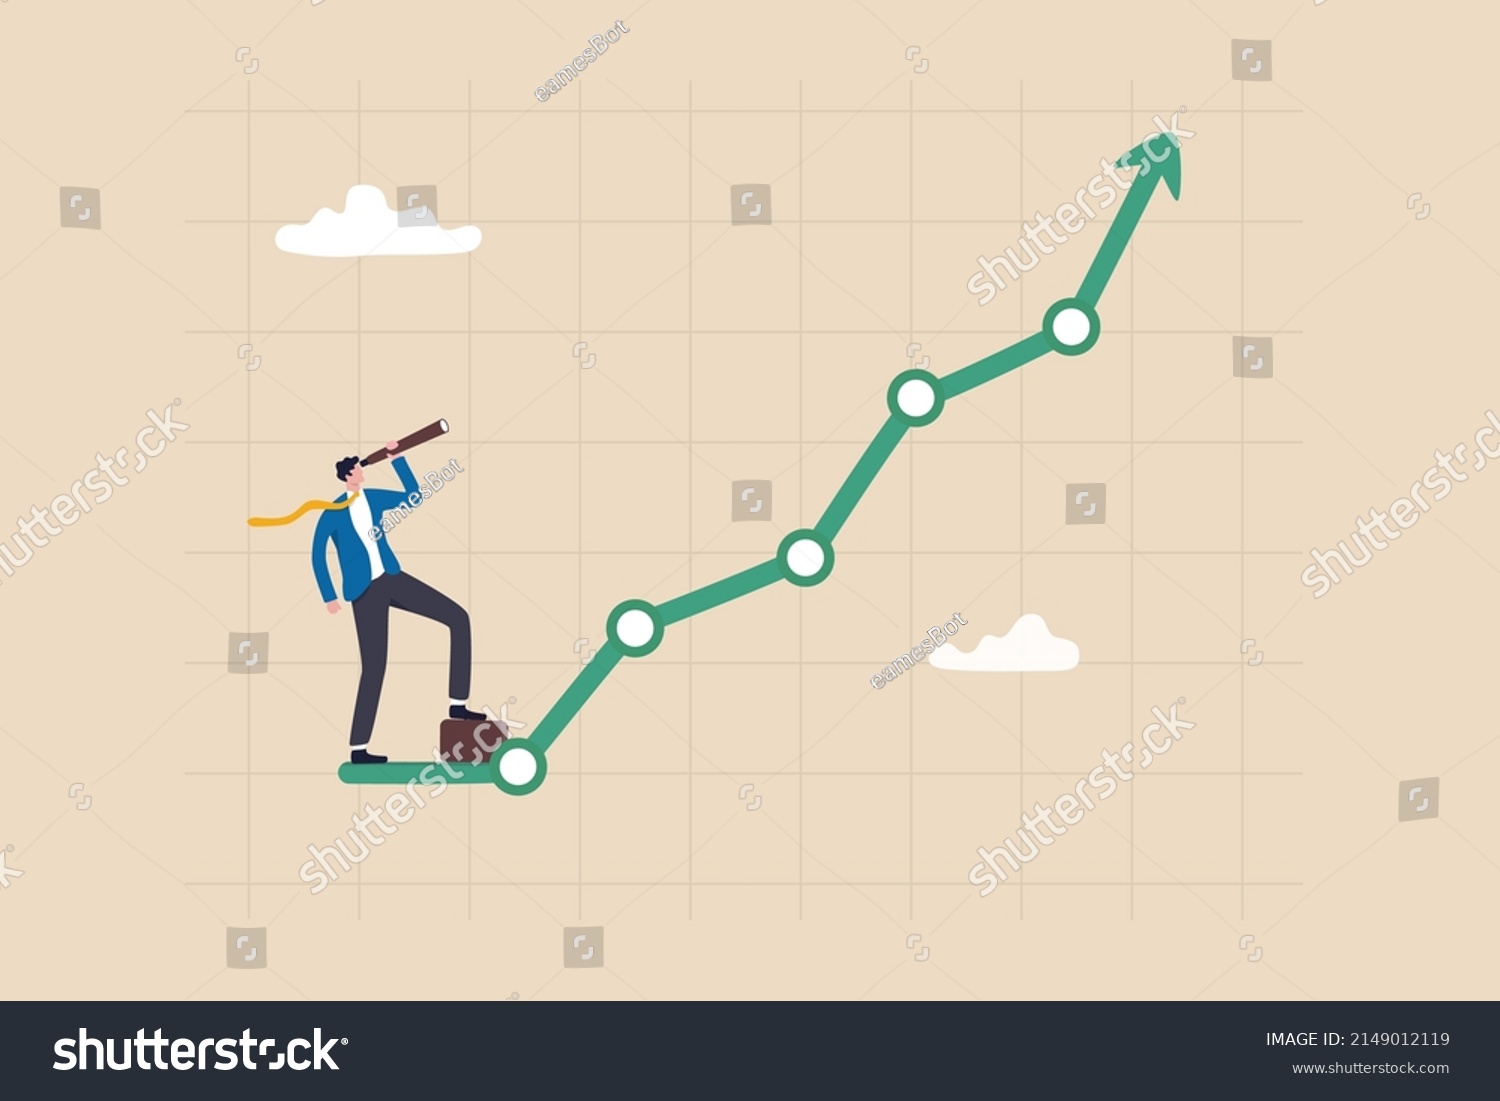 SVG of Investment upside potential, economy prediction or forecast, vision or analyze future, business growth or earning increase concept, businessman look through telescope to see investment growing graph. svg